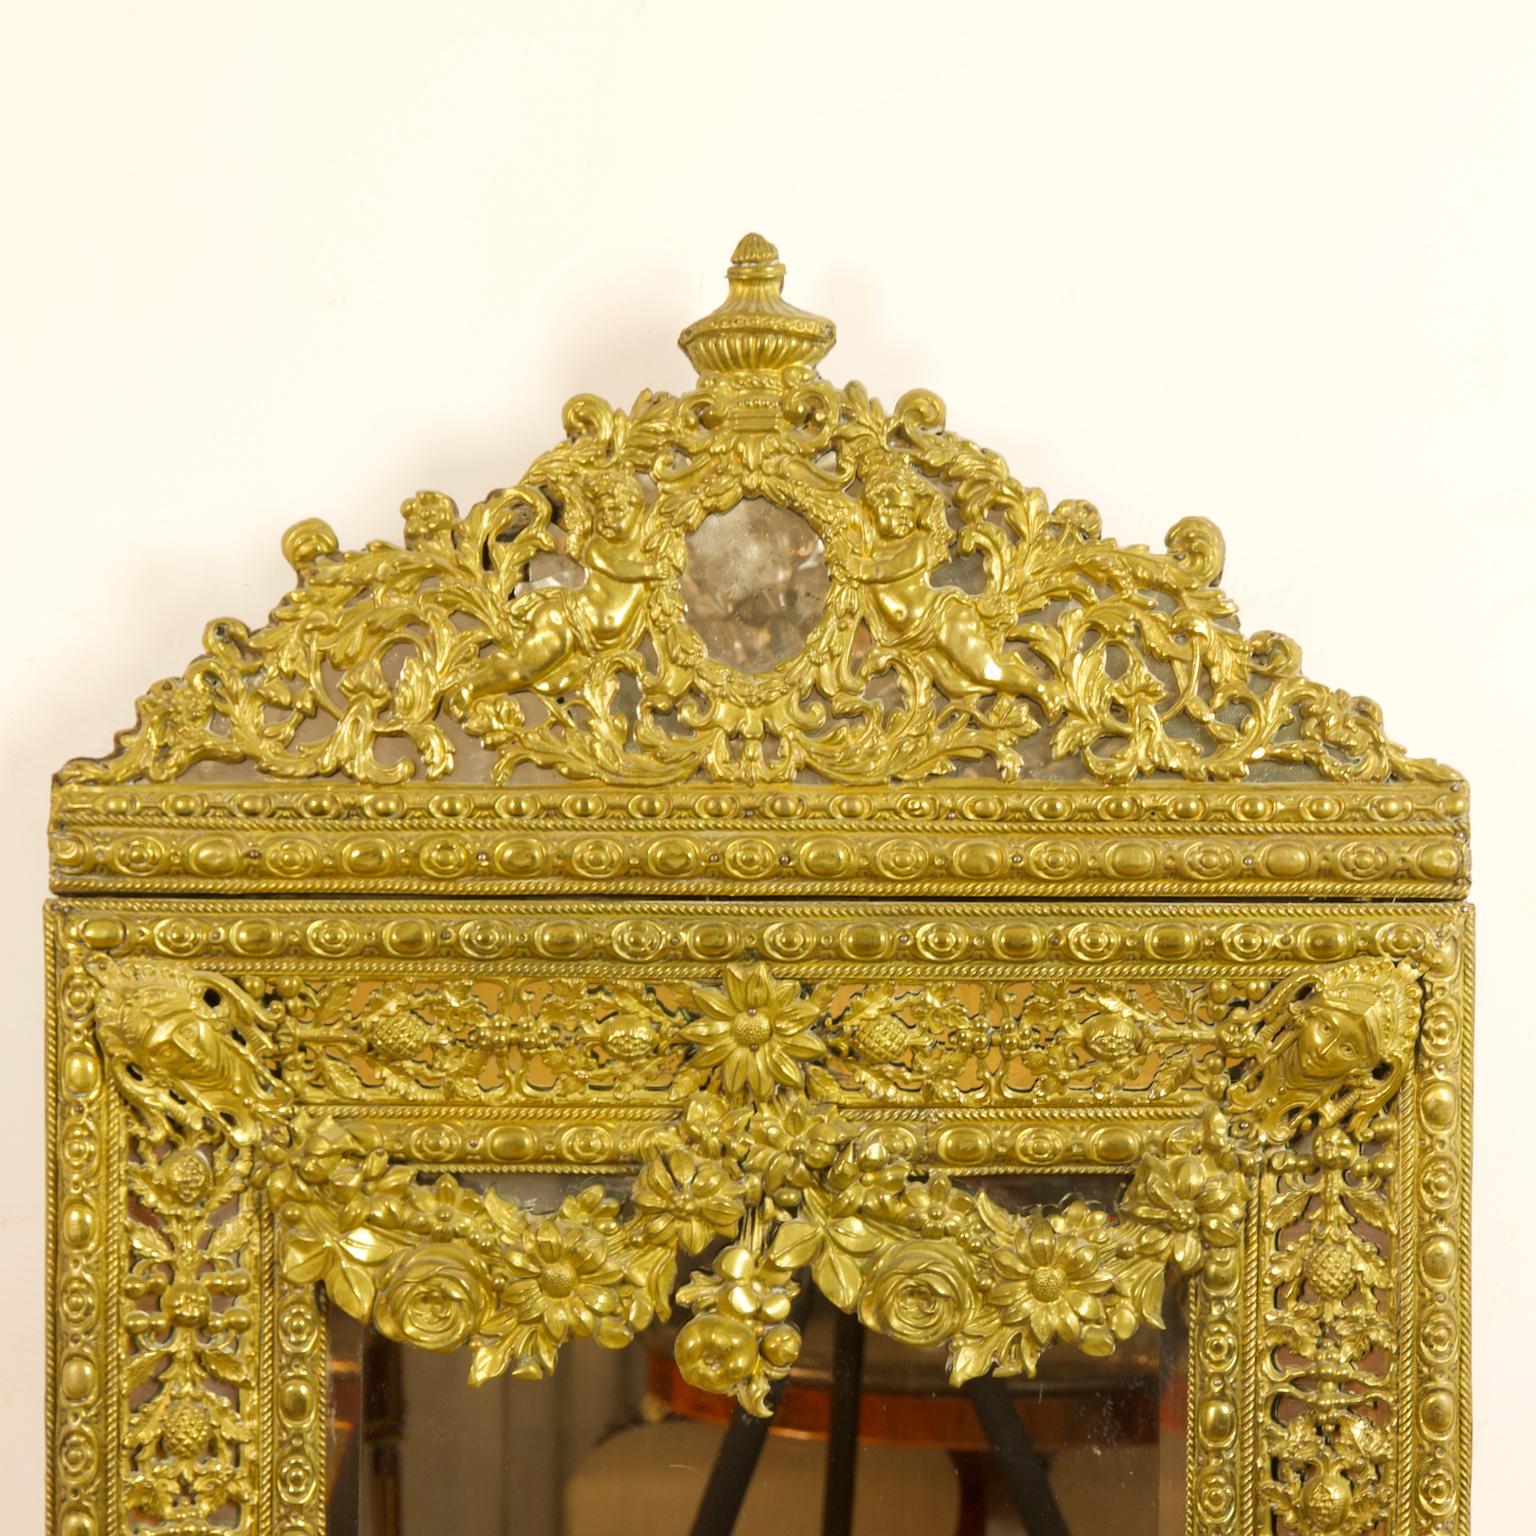 19th century Dutch Louis XIV Baroque style brass Repoussé wall mirror

Rectangular beveled mirror plate surrounded by a broad Baroque style brass frame with intricate repoussé fruit and foliage decoration, the corners of the frame with Baroque